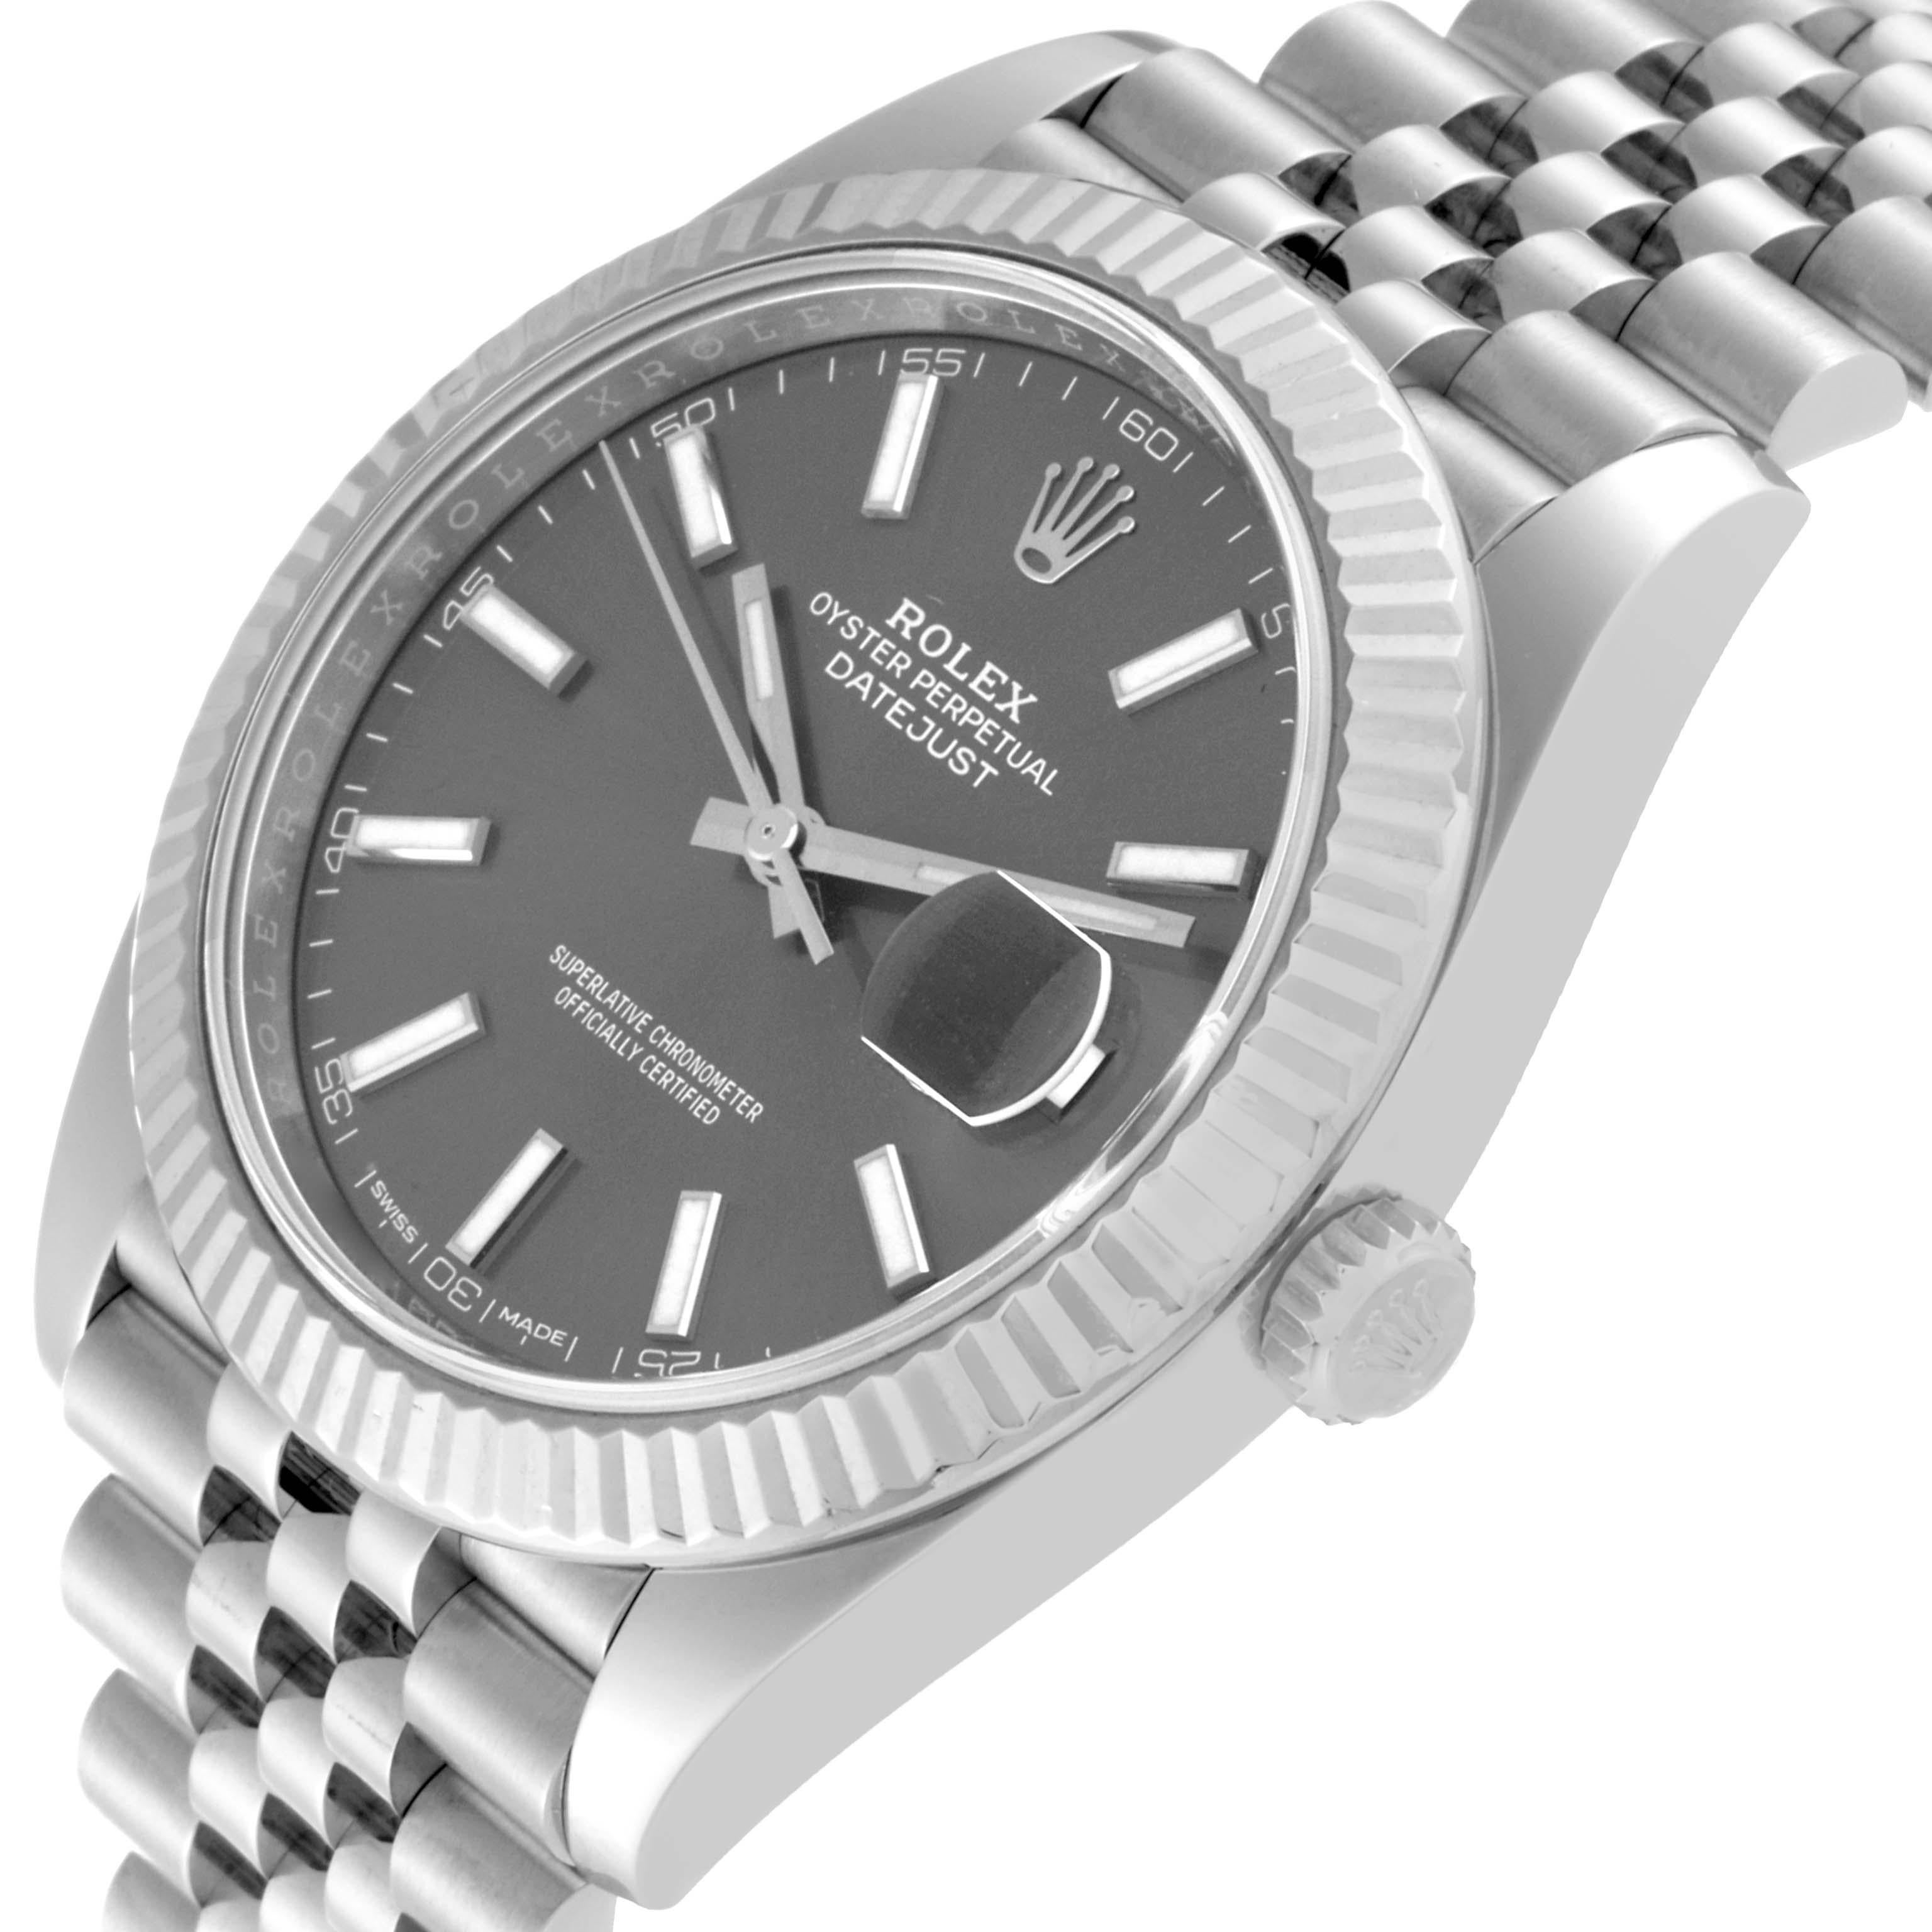 Rolex Datejust 41 Steel White Gold Slate Dial Mens Watch 126334 For Sale 4